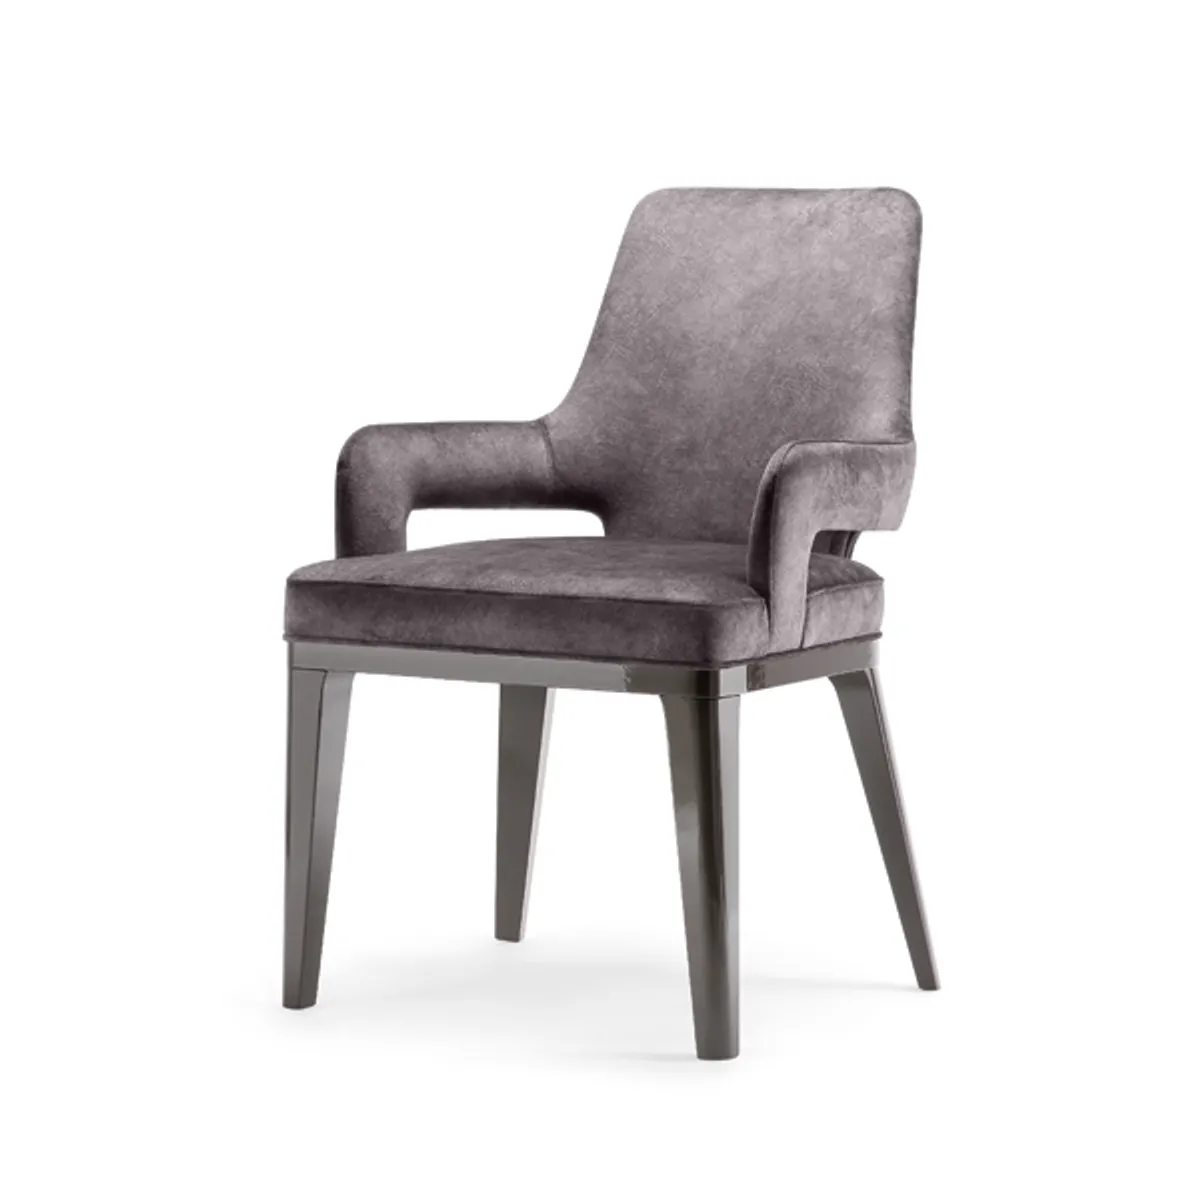 Aida armchair Inside Out Contracts2